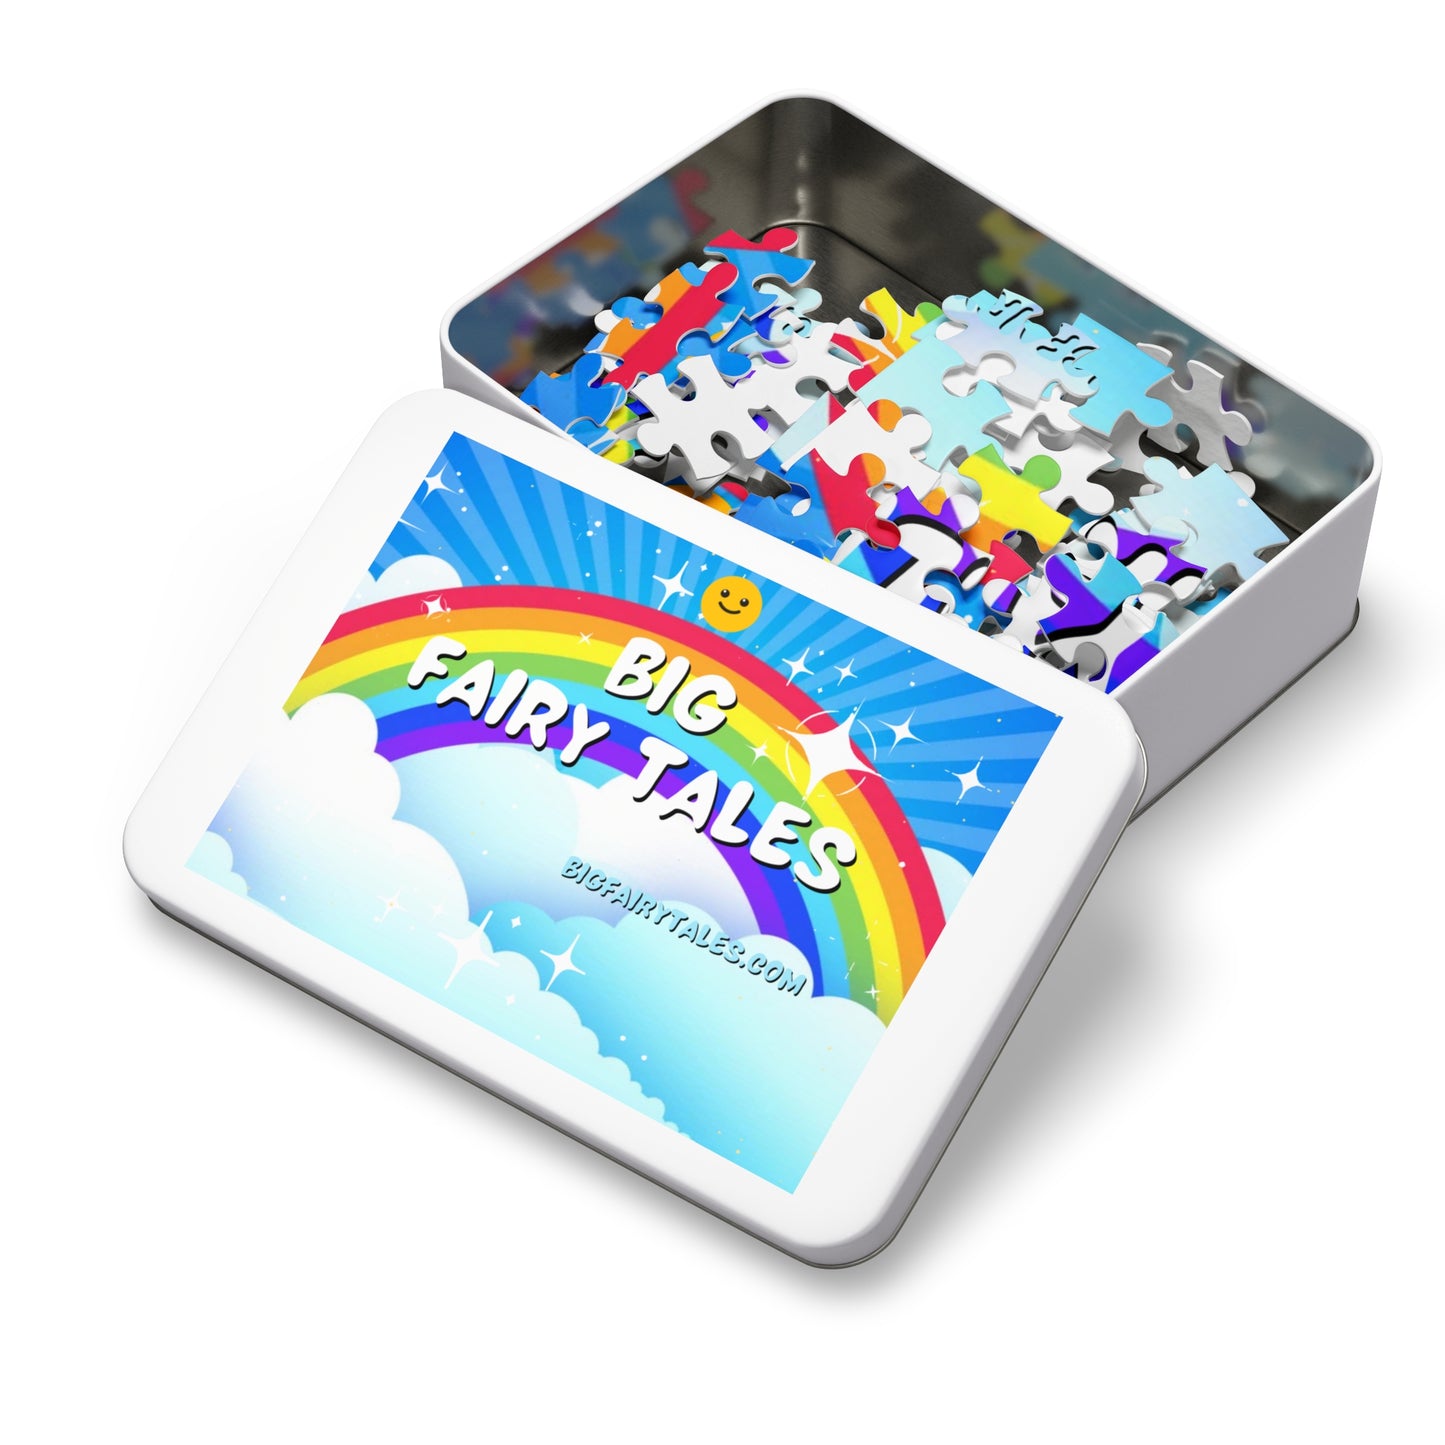 Sunny Day Rainbow Puzzle From Big Fairy Tales By Schatar